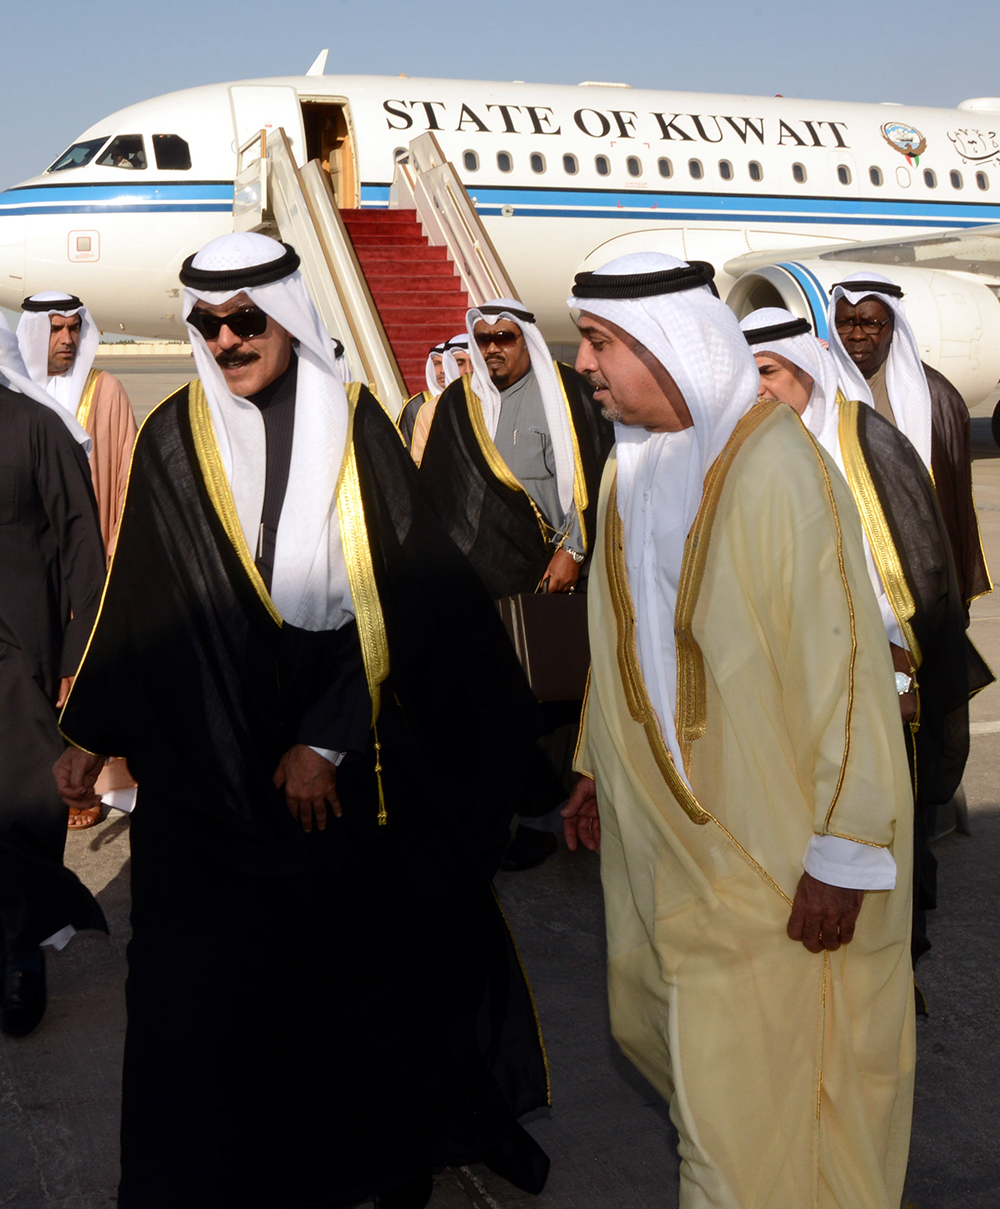 Representative of His Highness the Amir arrives in UAE